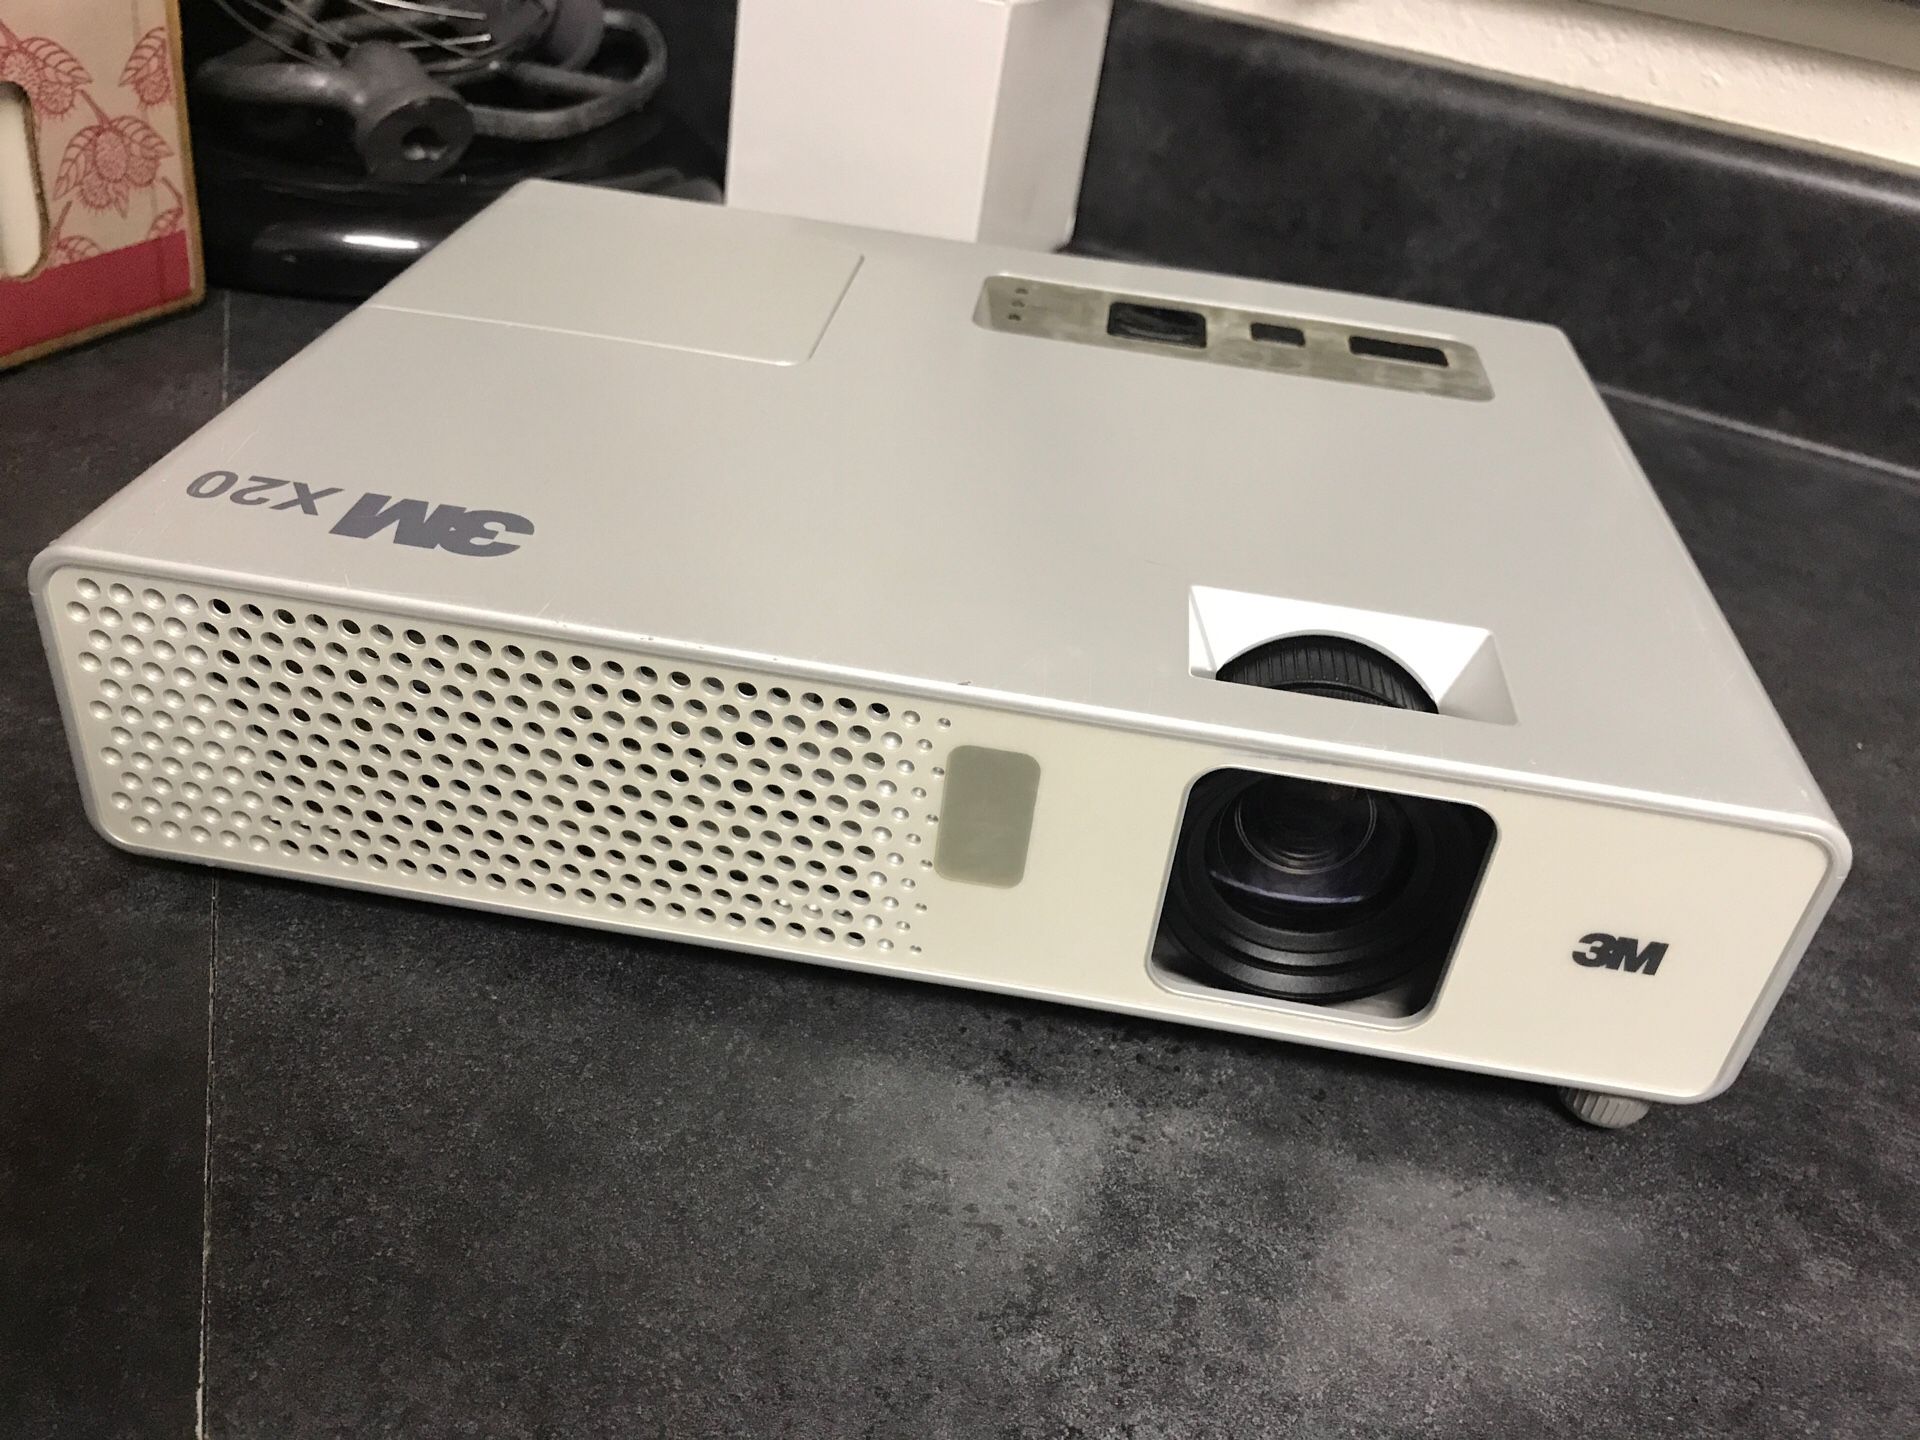 3M X20 Projector